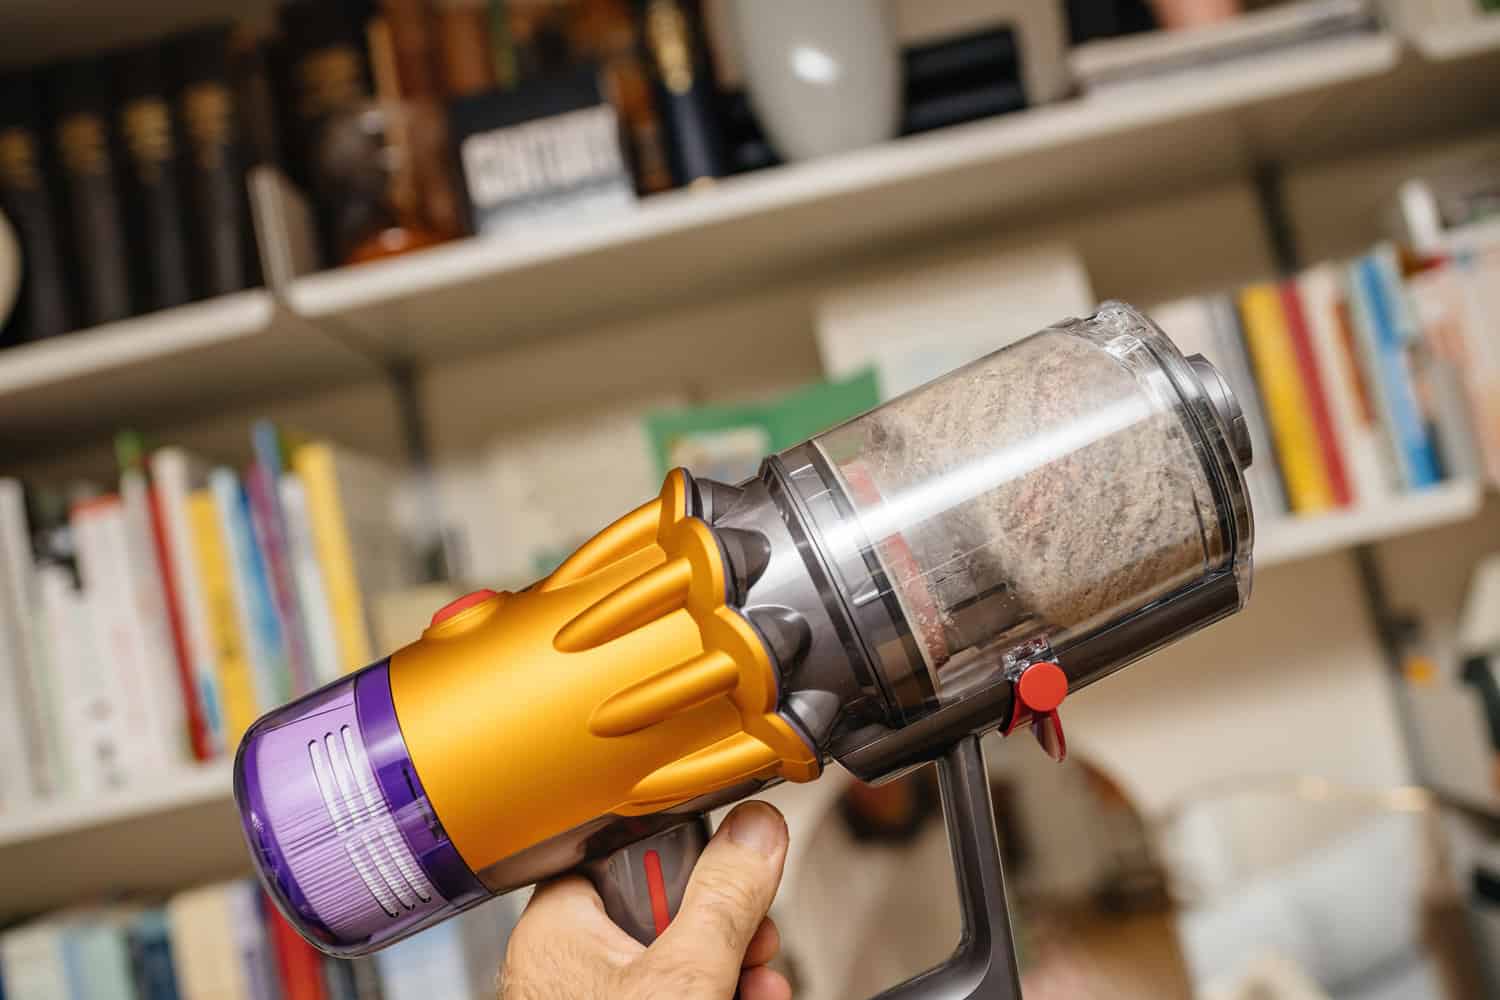 POV male hand holding new cordless vacuum cleaner by Dyson V12 with filled bin multiple dust particle, hair and other debris found in house